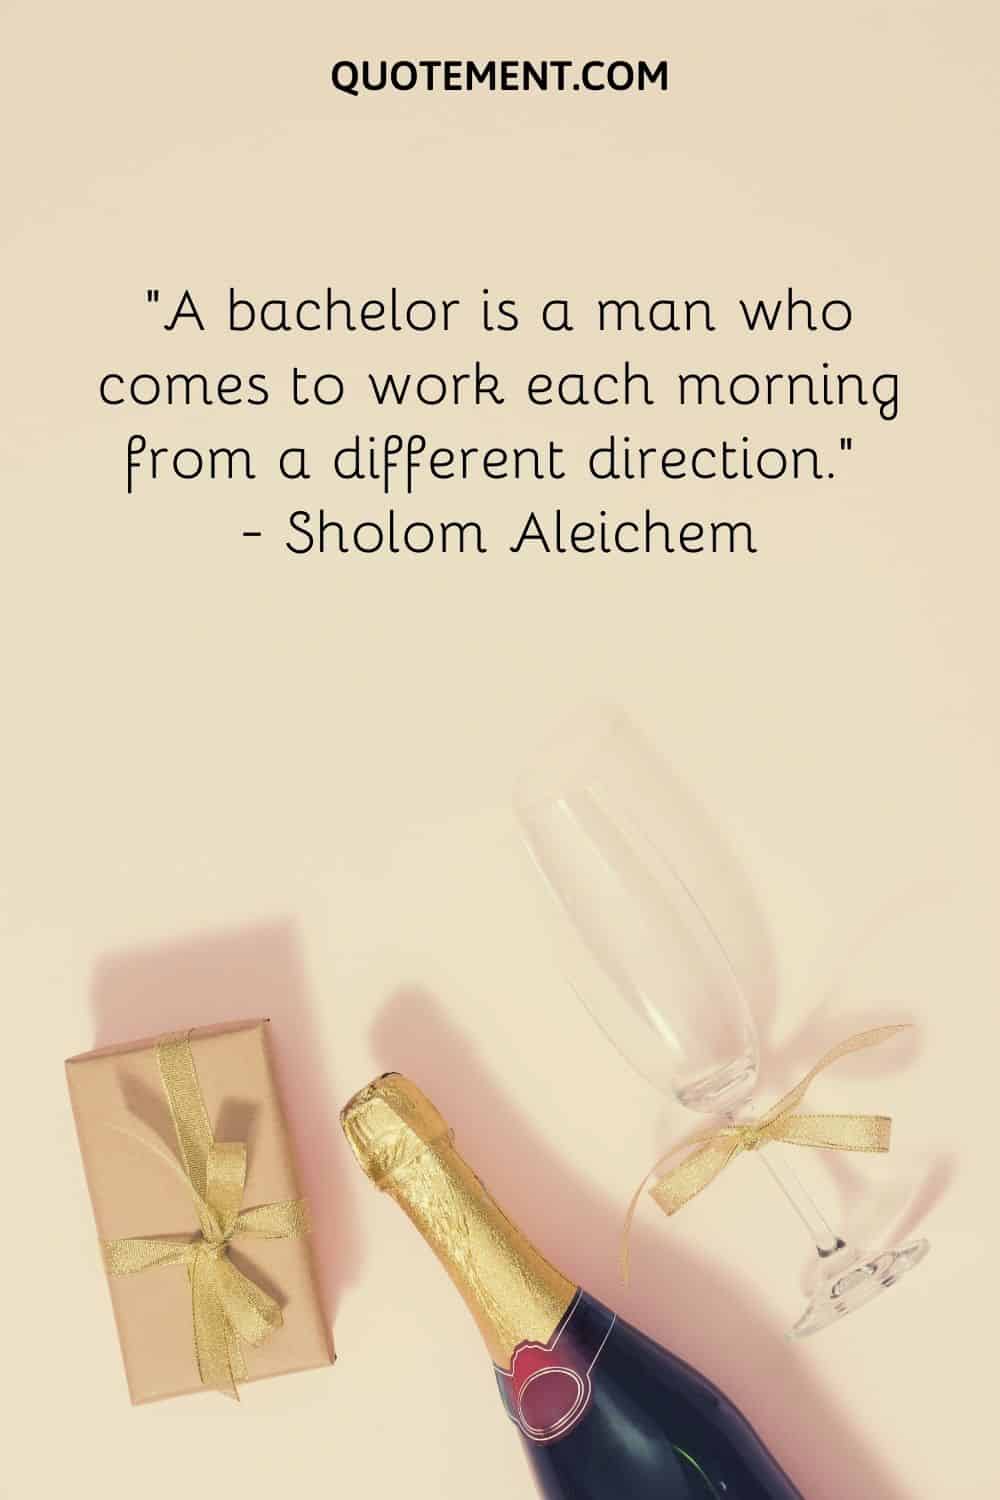 A bachelor is a man who comes to work each morning from a different direction